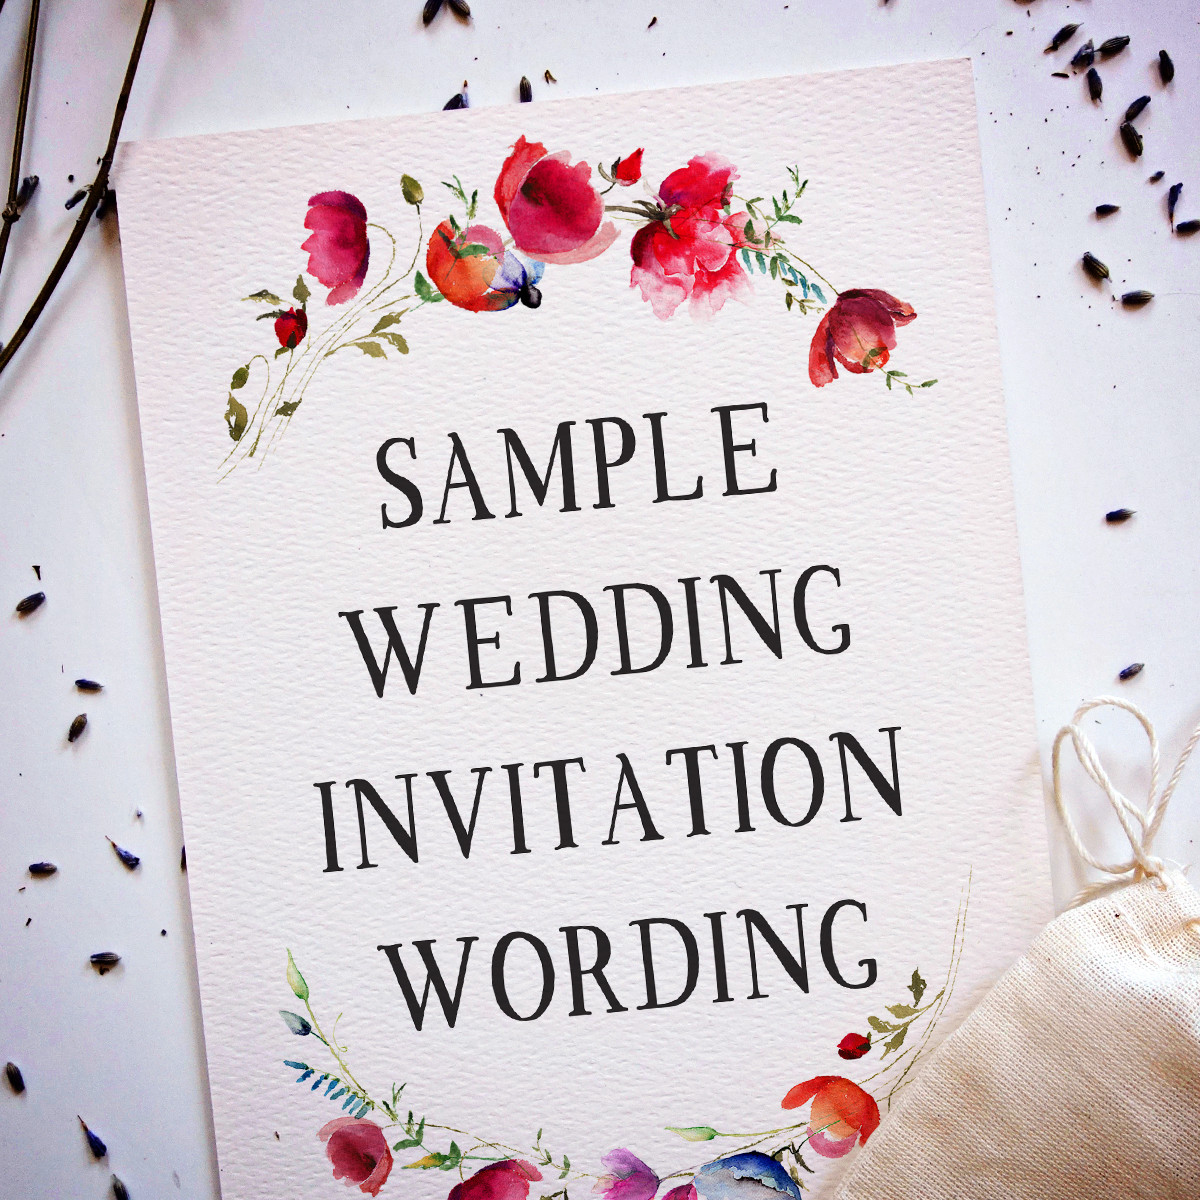 Free Wedding Invitation Samples
 Wedding Invitation Wording Samples from Traditional to